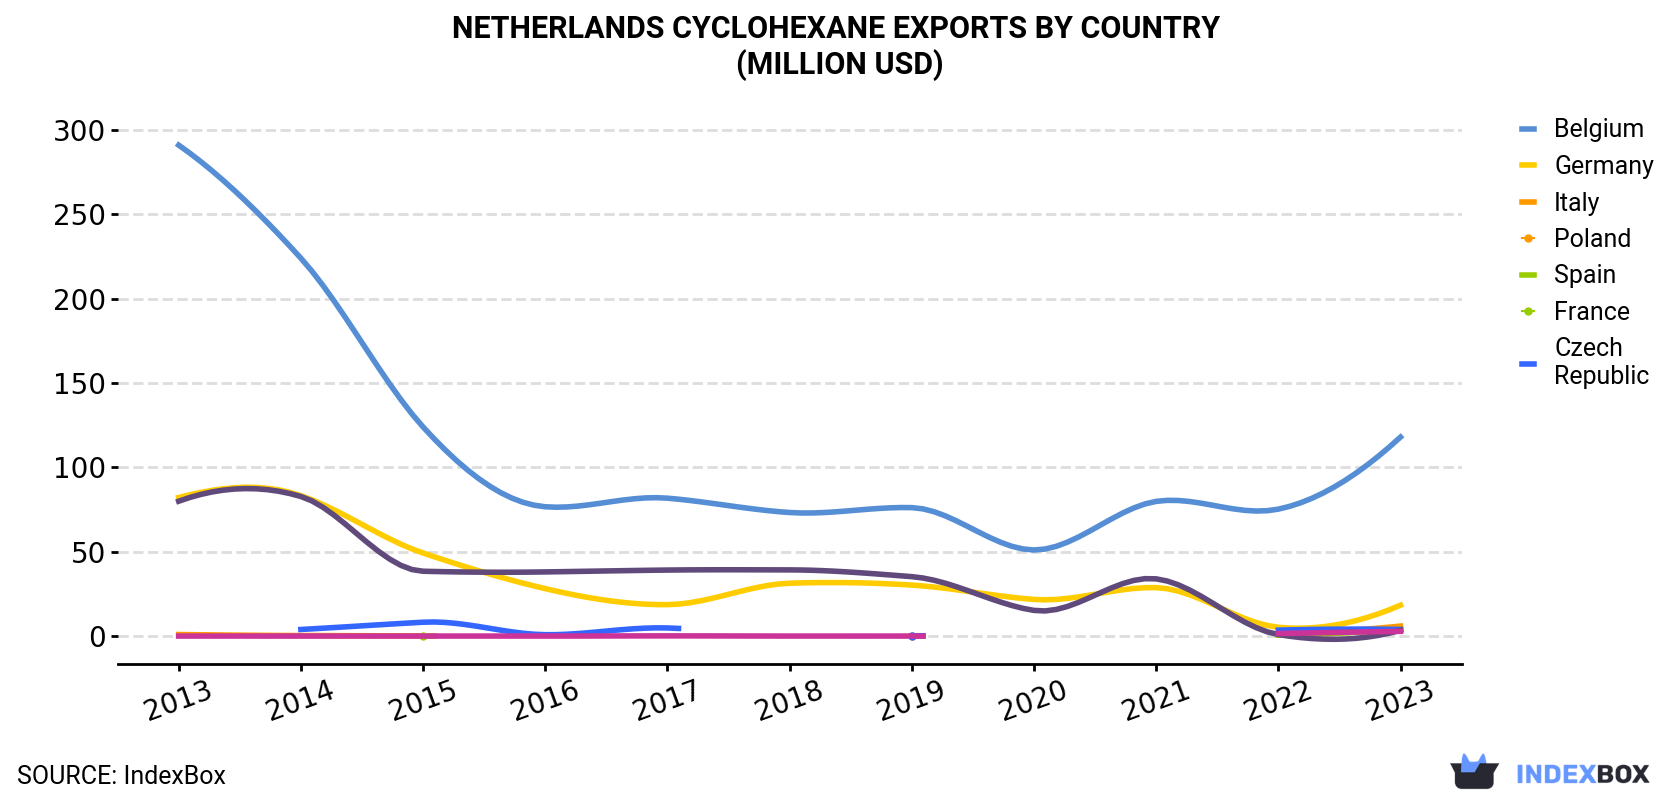 Netherlands Cyclohexane Exports By Country (Million USD)